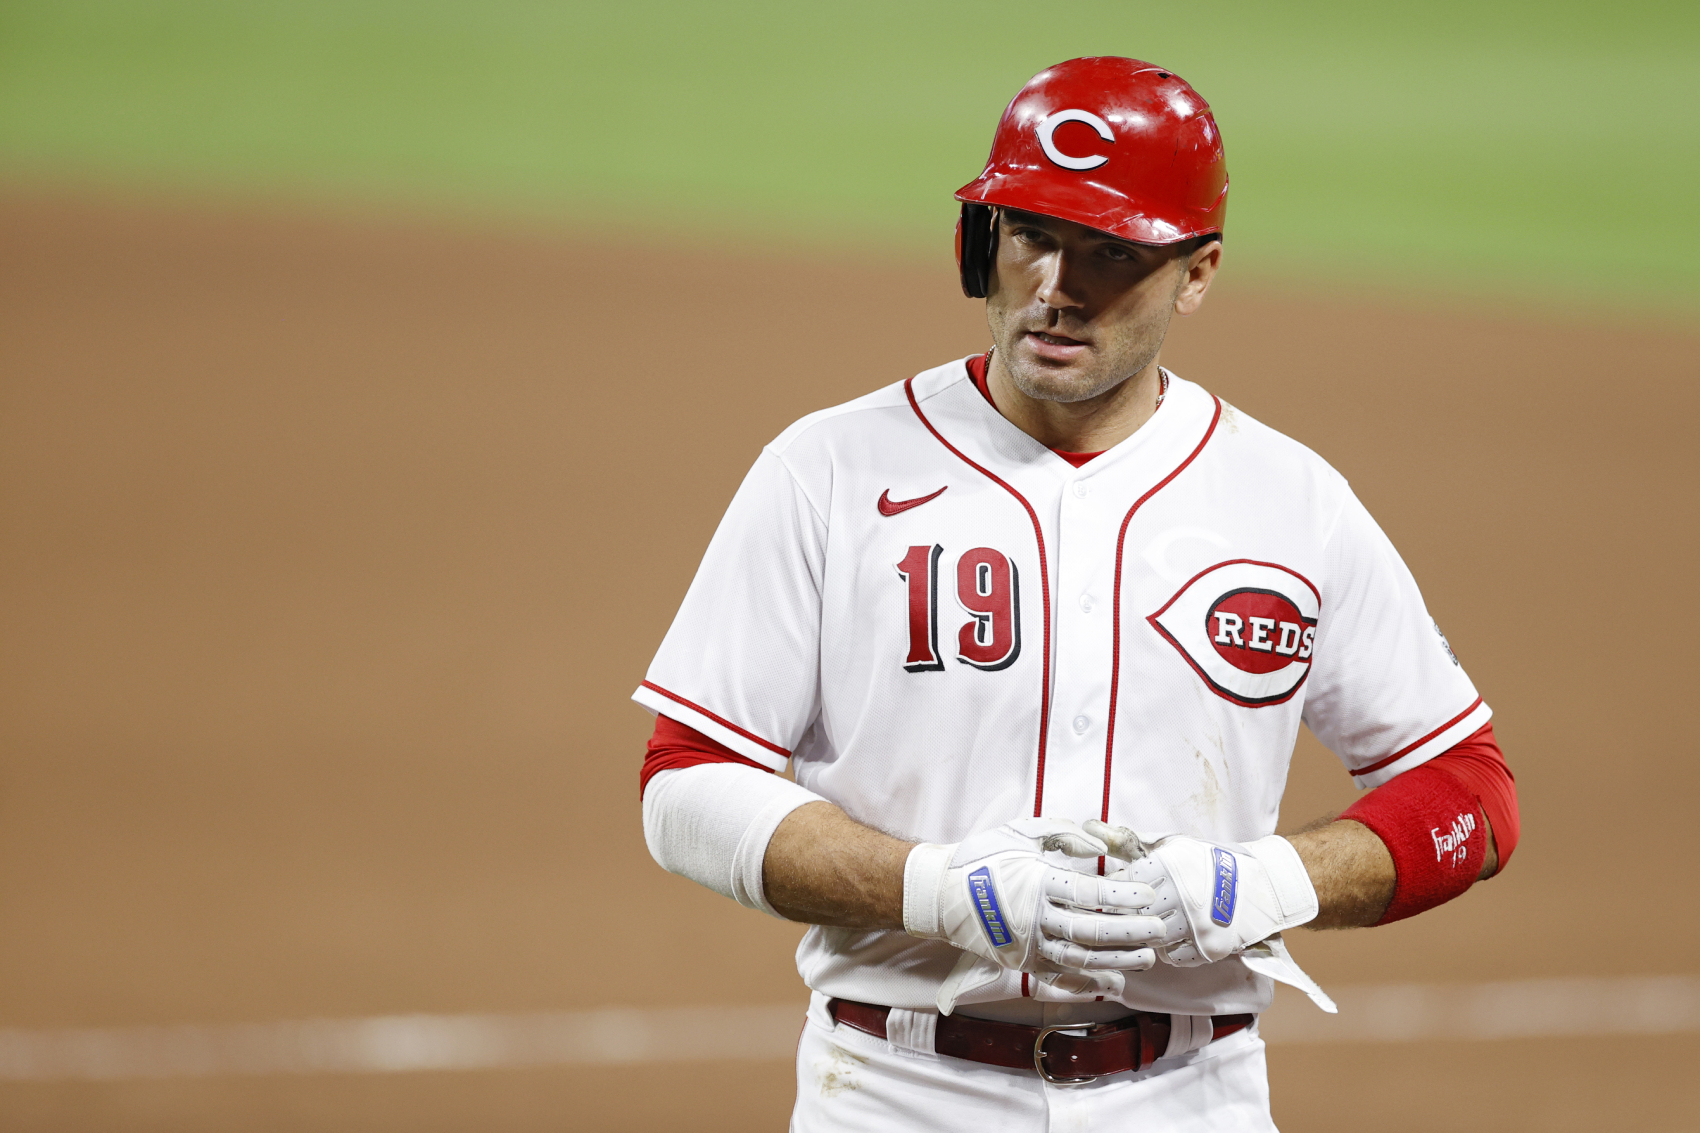 As the MLB season comes to a close, Joey Votto just sent a stern message to the entire league and called the Cincinnati Reds a "nightmare."